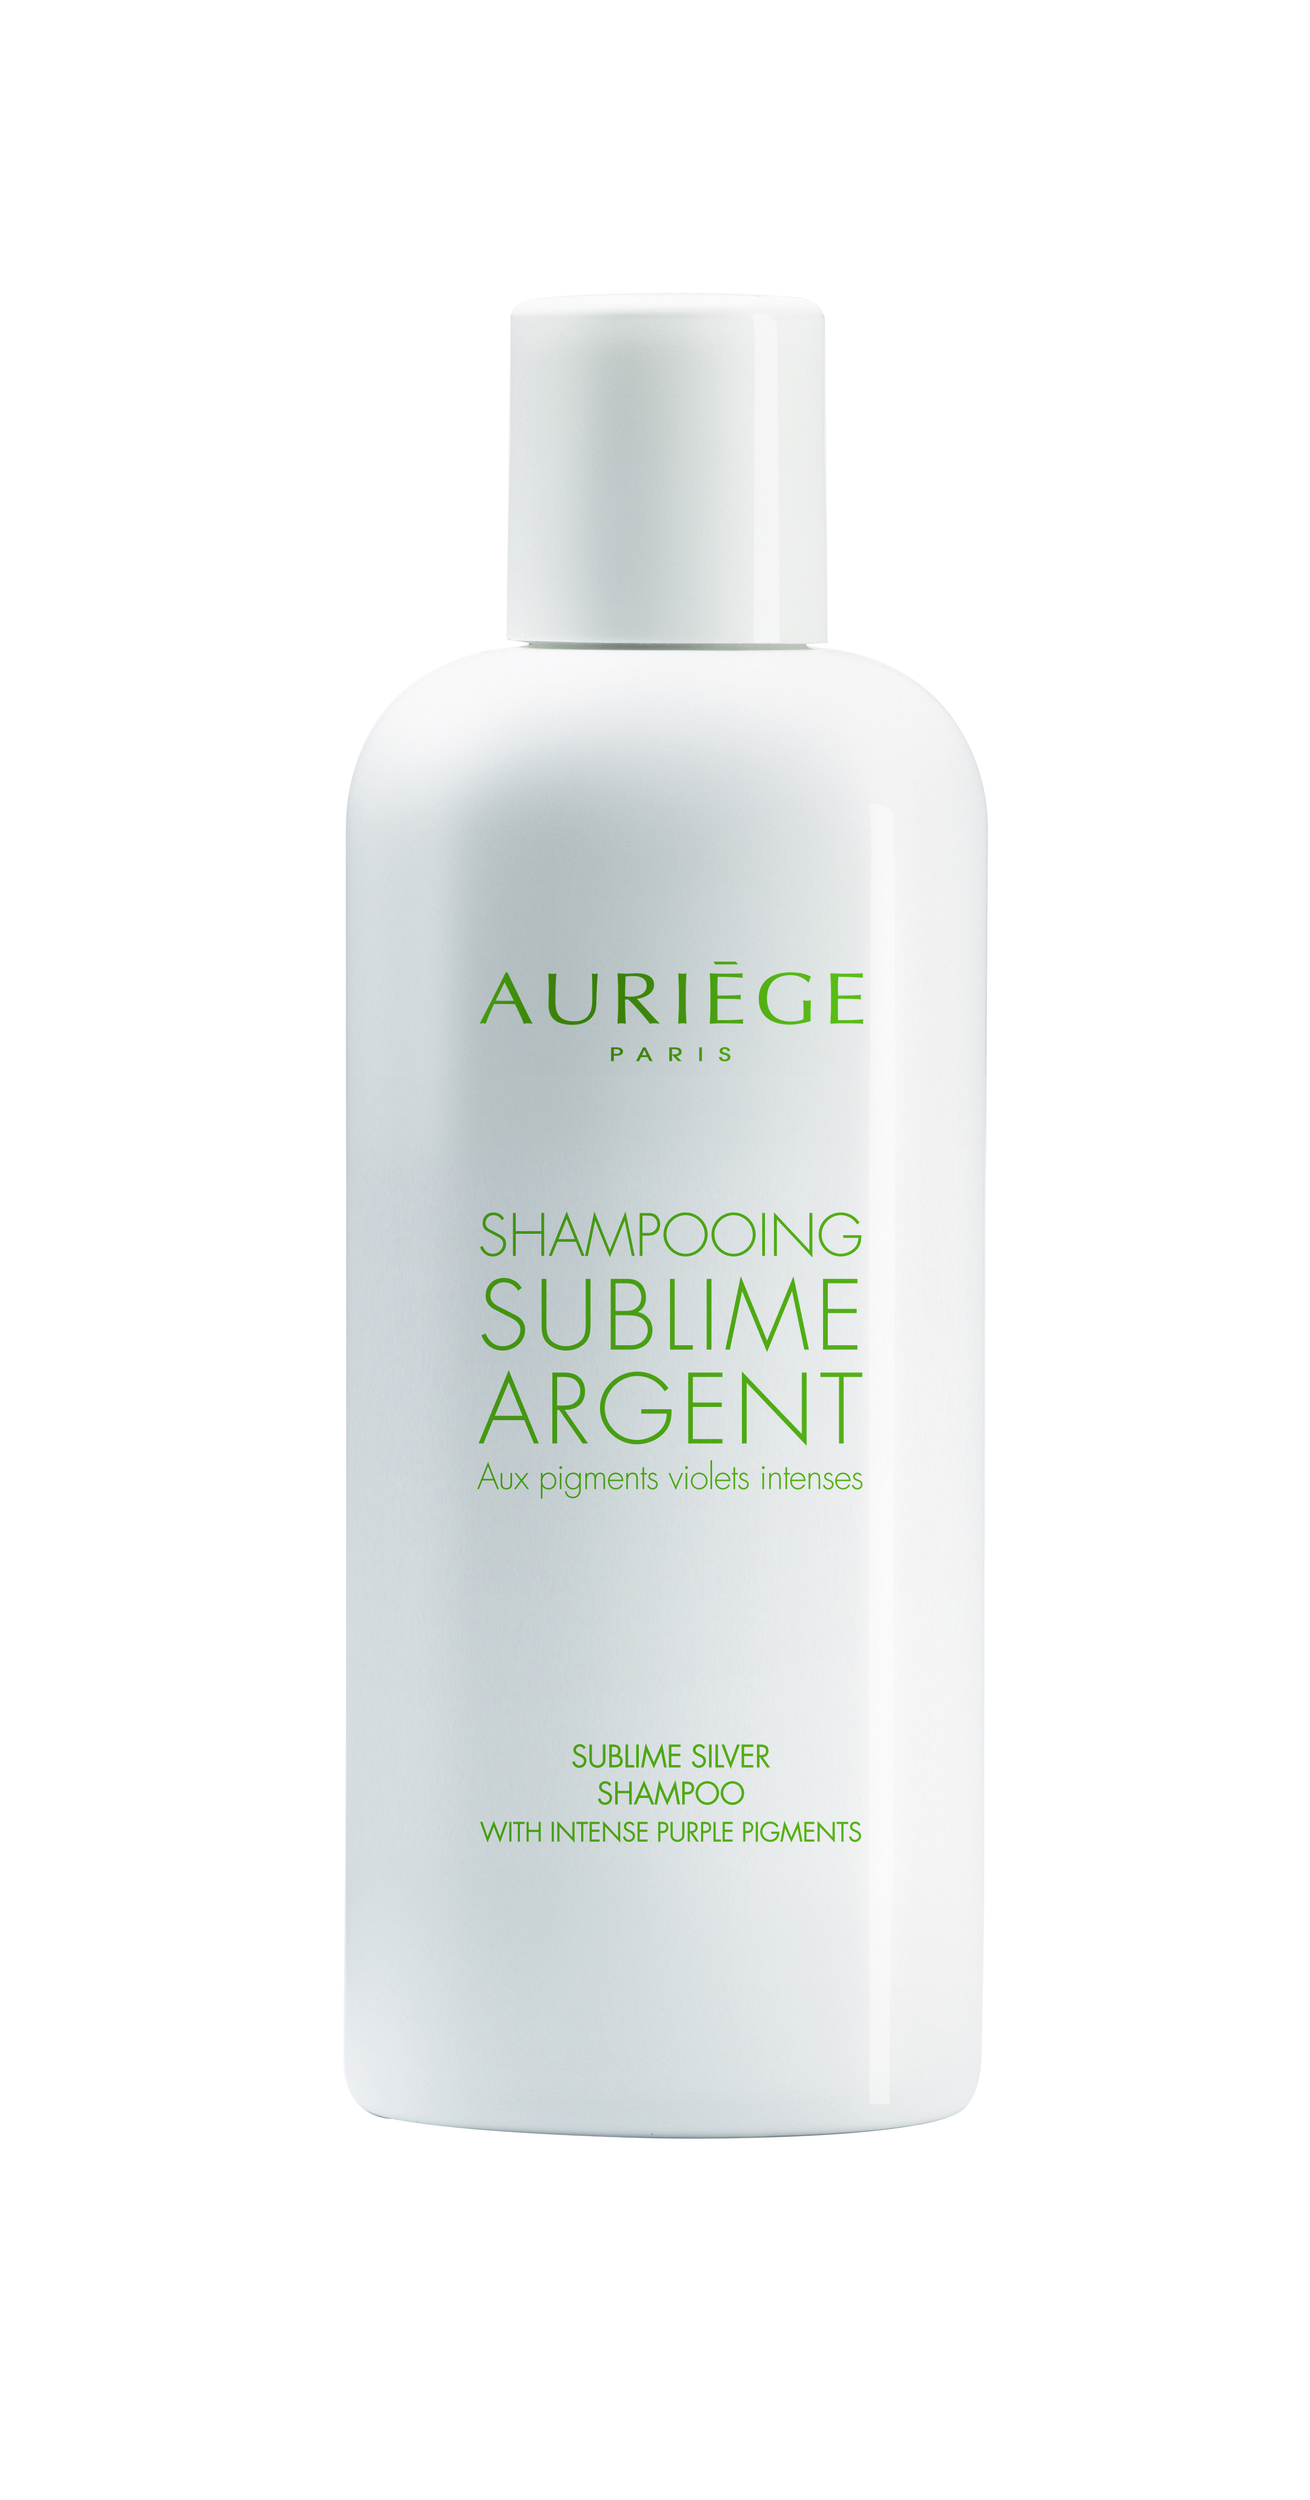 SHAMPOOING SUBLIME ARGENT